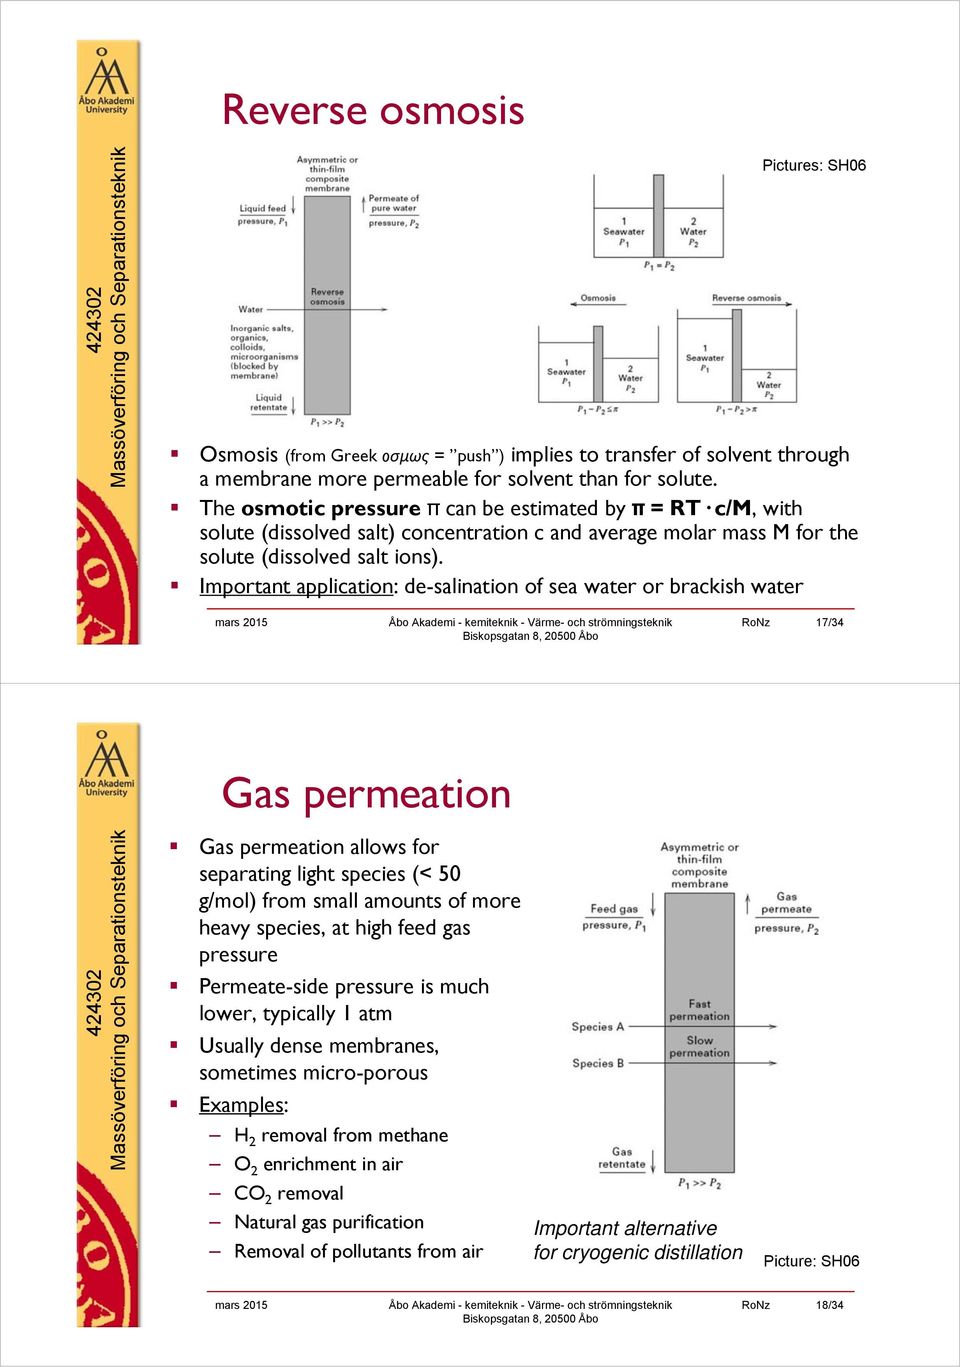 Important application: de-salination of sea water or brackish water 17/34 Gas permeation Gas permeation allows for separating light species (< 50 g/mol) from small amounts of more heavy species, at